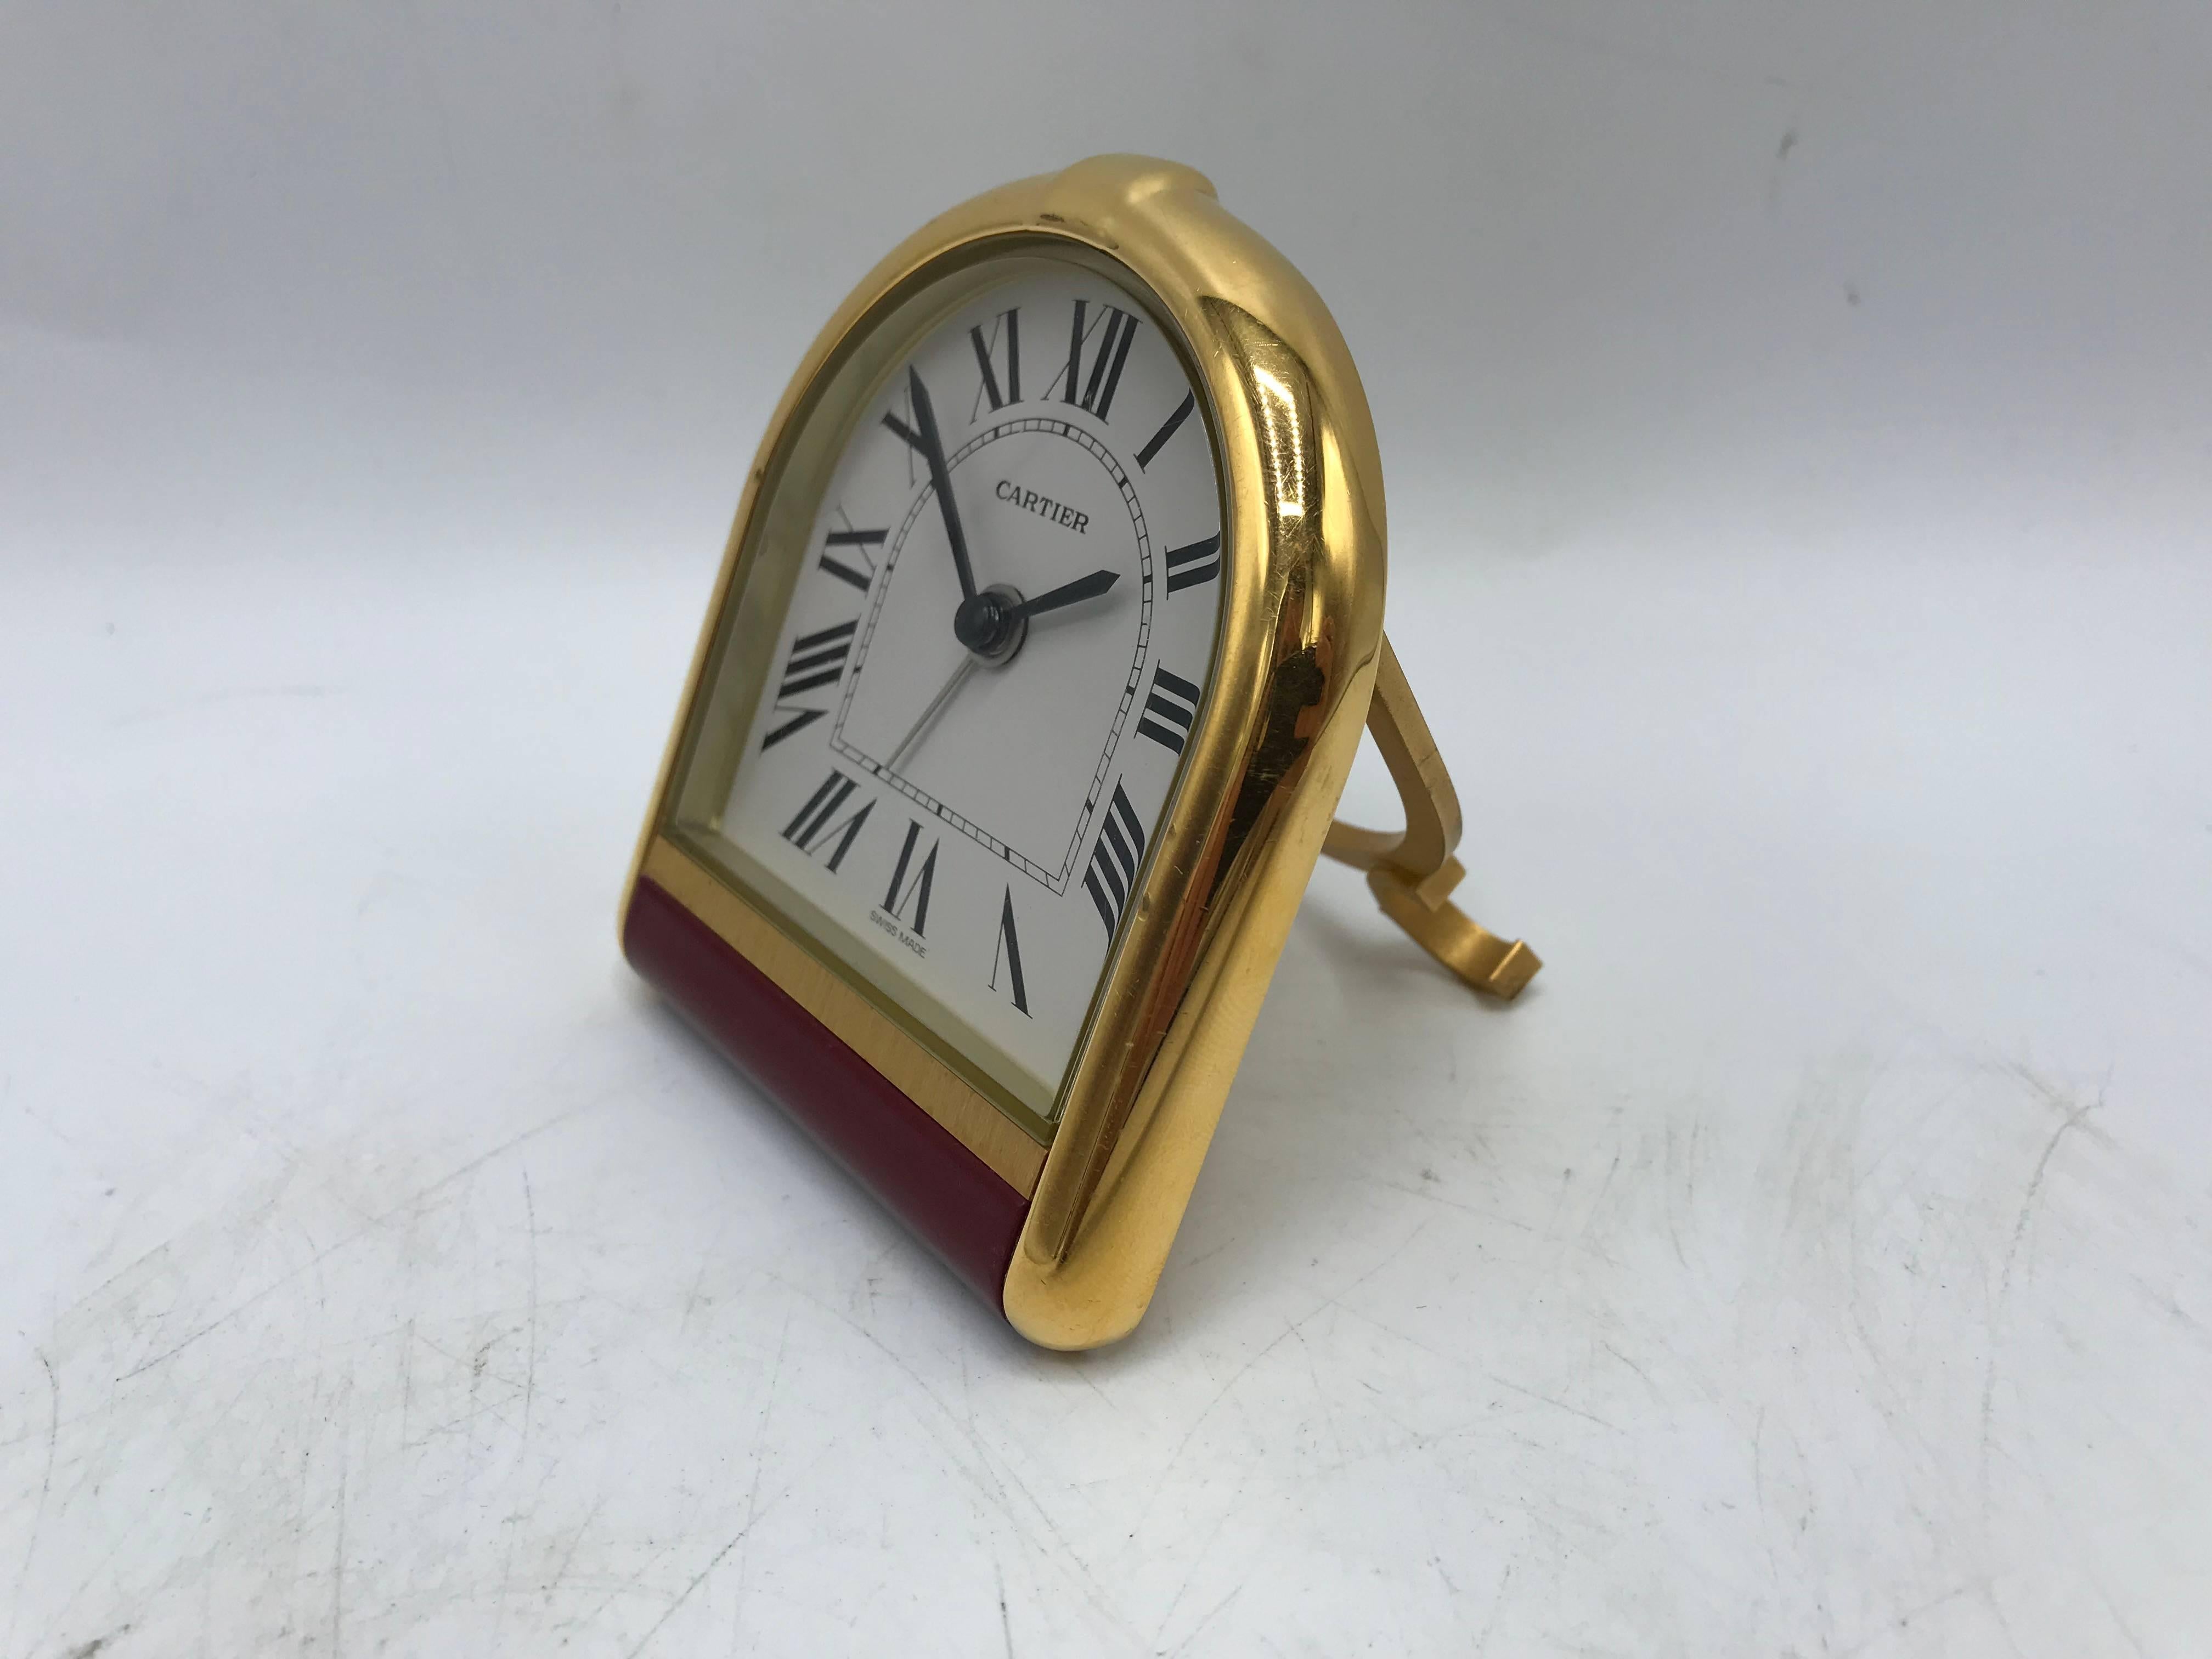 Offered is an exquisite, 1980s Cartier gold travel clock with a red enamel band across the bottom. Glass front. Per Cartier's usual attention to detail, the stand has two mirrored 'C's in Cartier's signature font as the feet, a blue stone on the